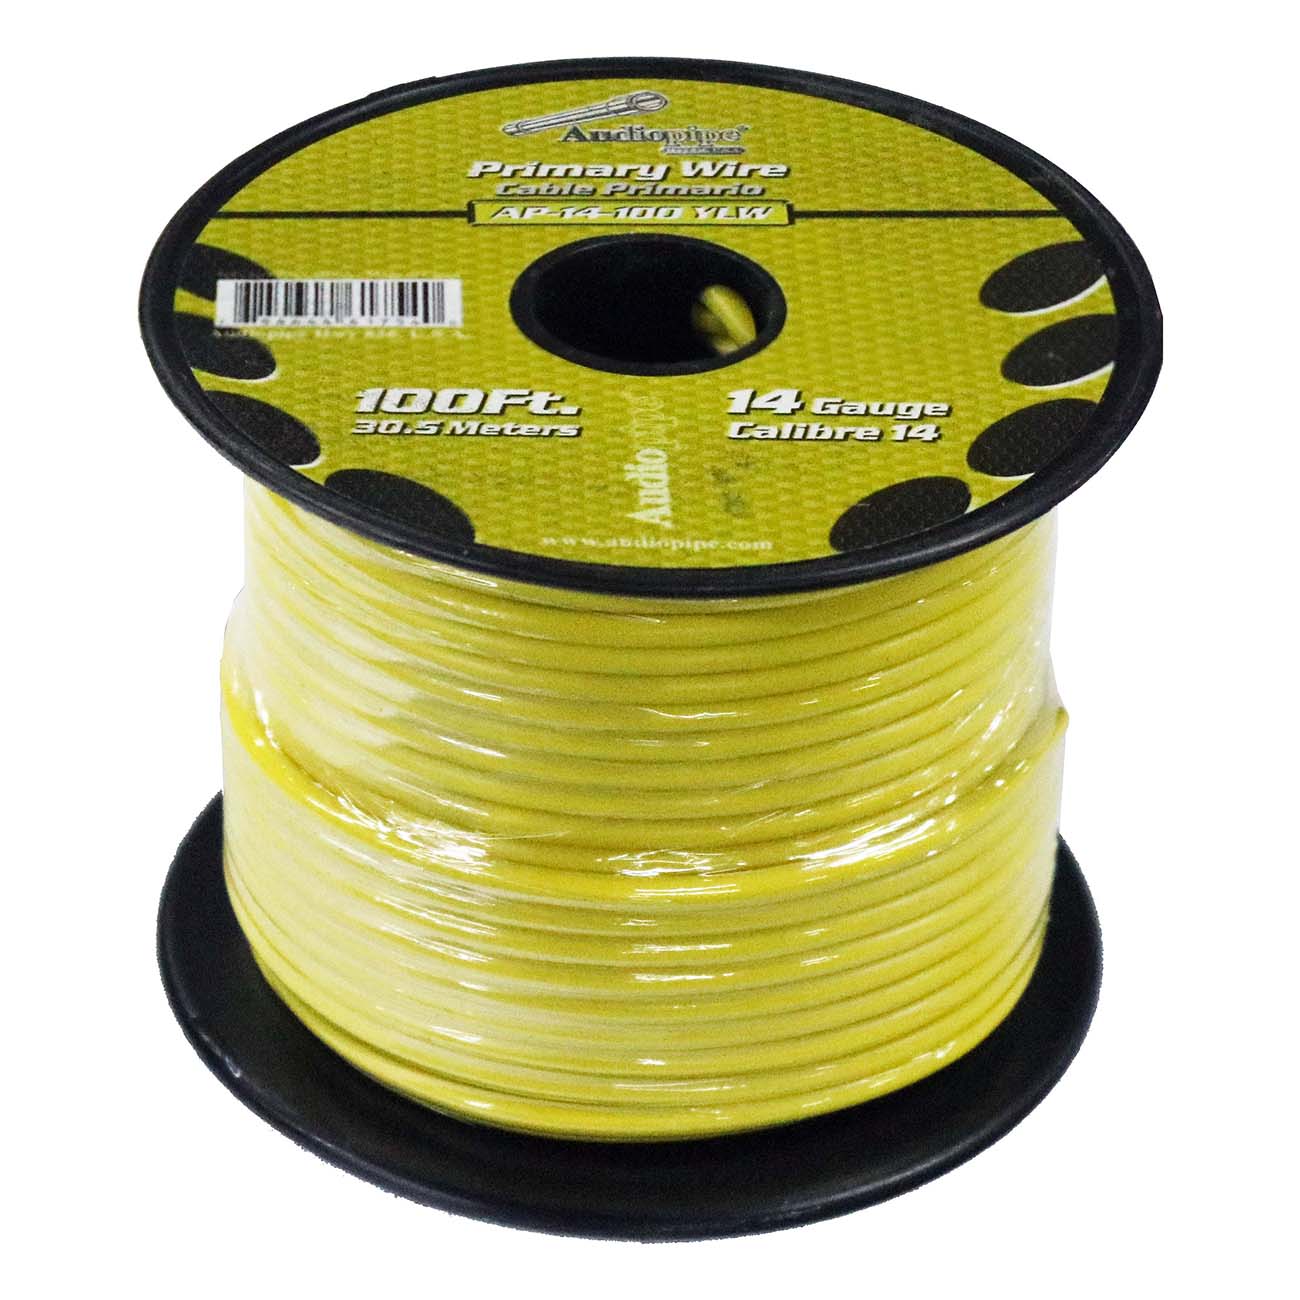 Audiopipe AP14100YW Primary Wire 14 Gauge 100 Foot – Yellow